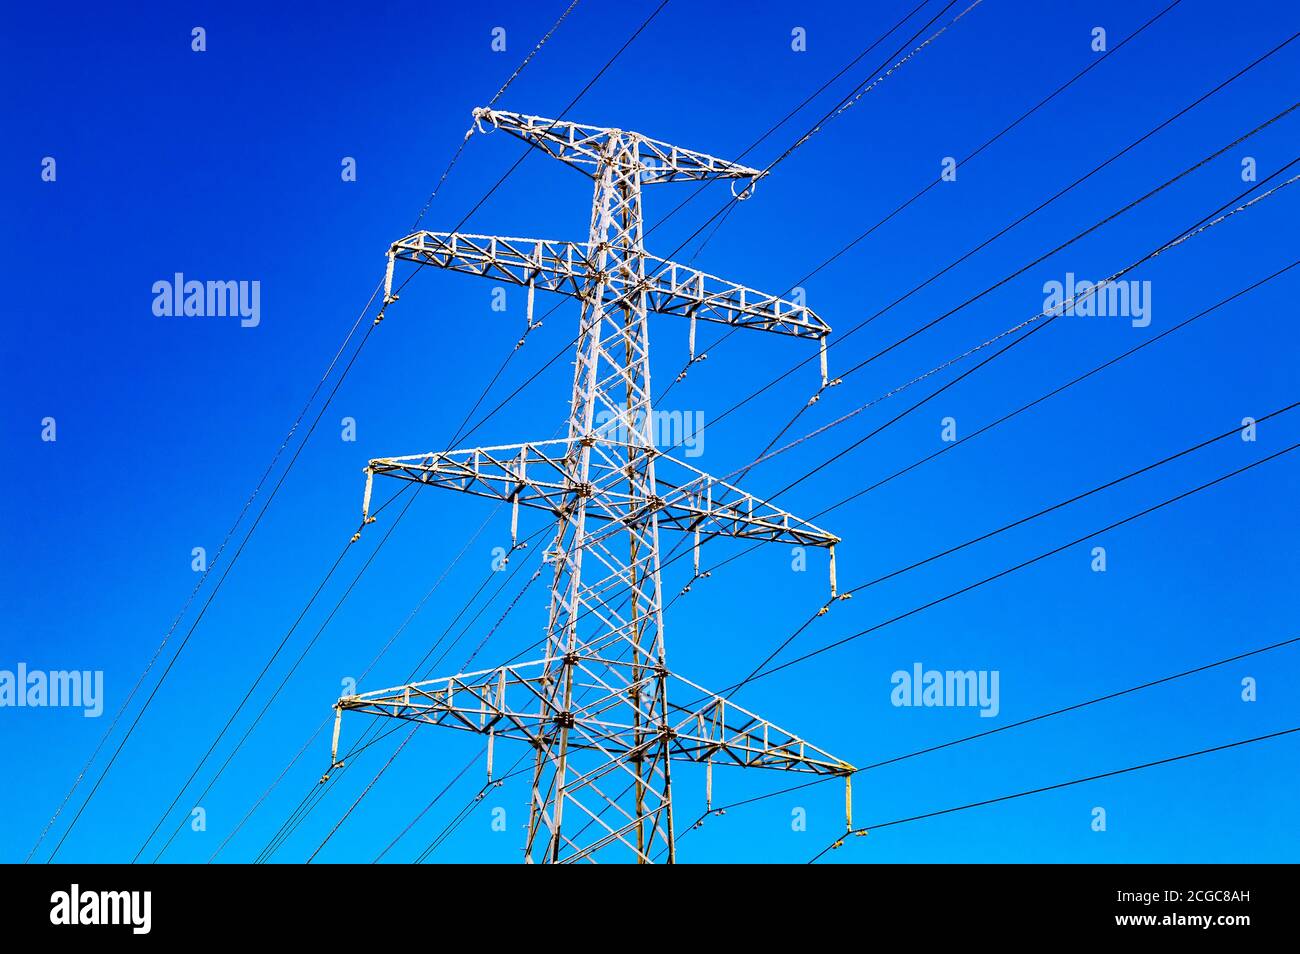 High-voltage power line and blue color metal prop with many electrical wires close up Stock Photo